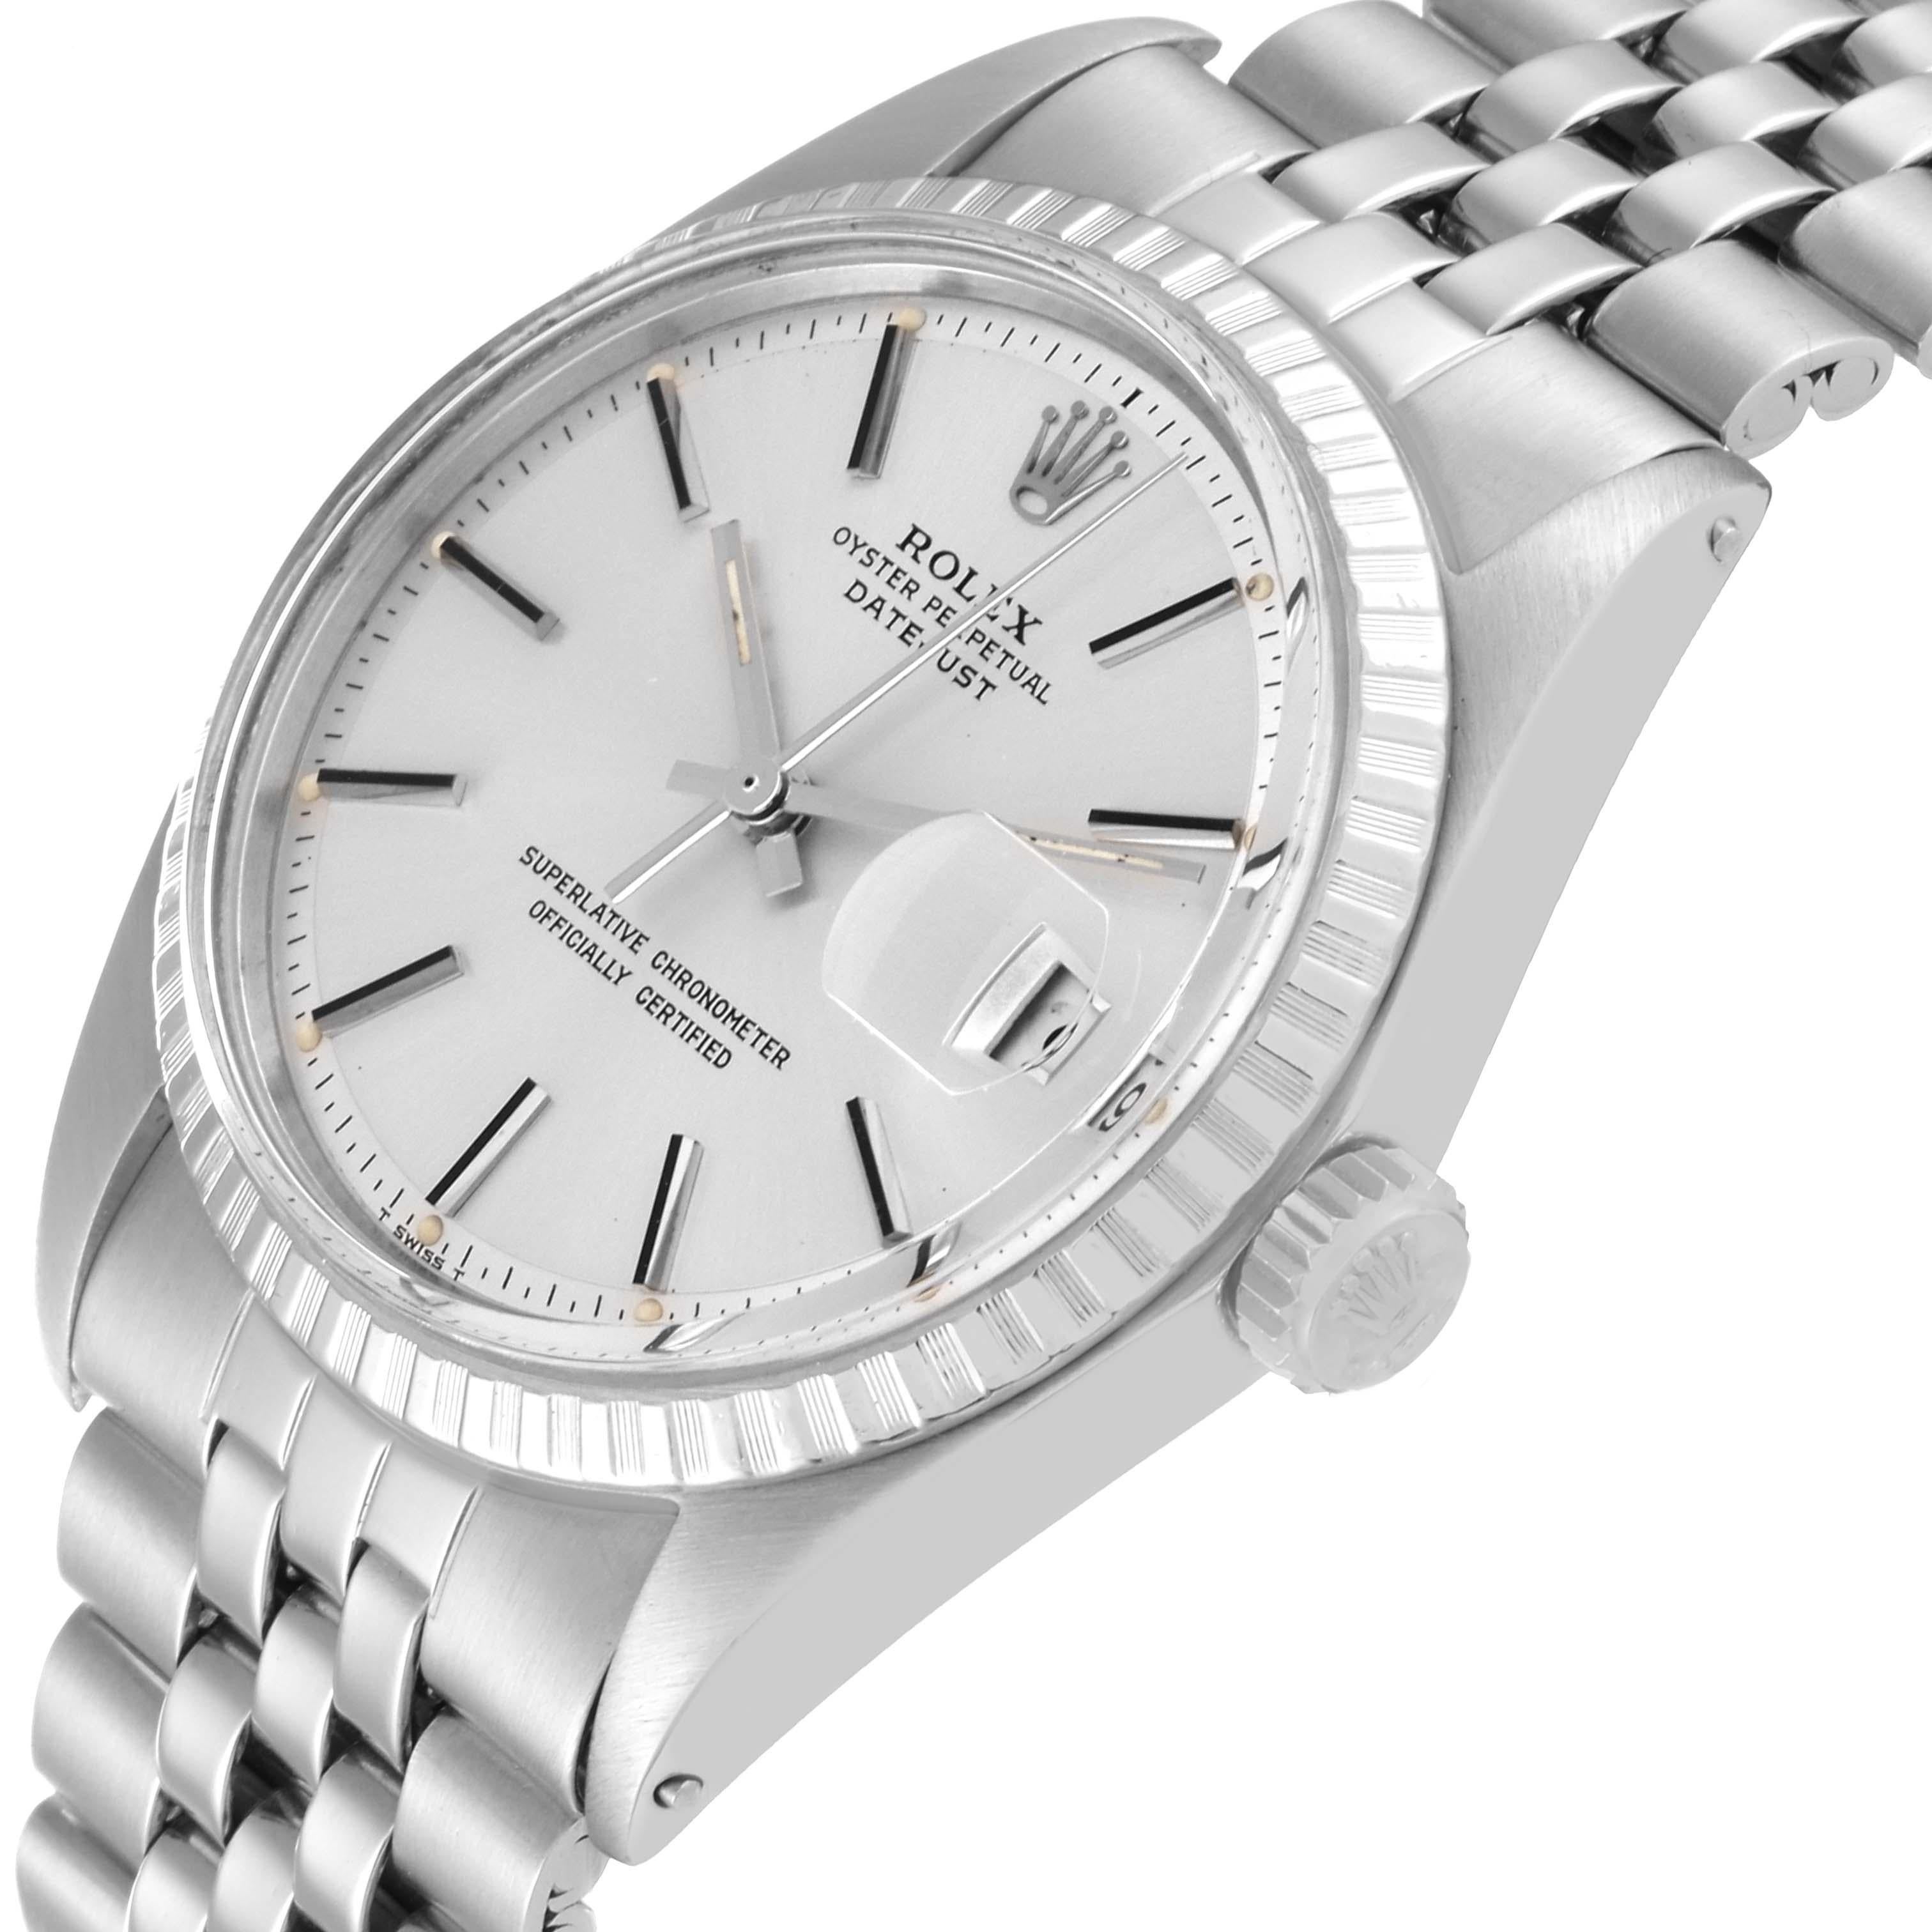 Rolex Datejust Silver Dial Engine Turned Bezel Steel Vintage Mens Watch 1603. Officially certified chronometer automatic self-winding movement. Stainless steel oyster case 36.0 mm in diameter. Rolex logo on the crown. Stainless steel engine turned